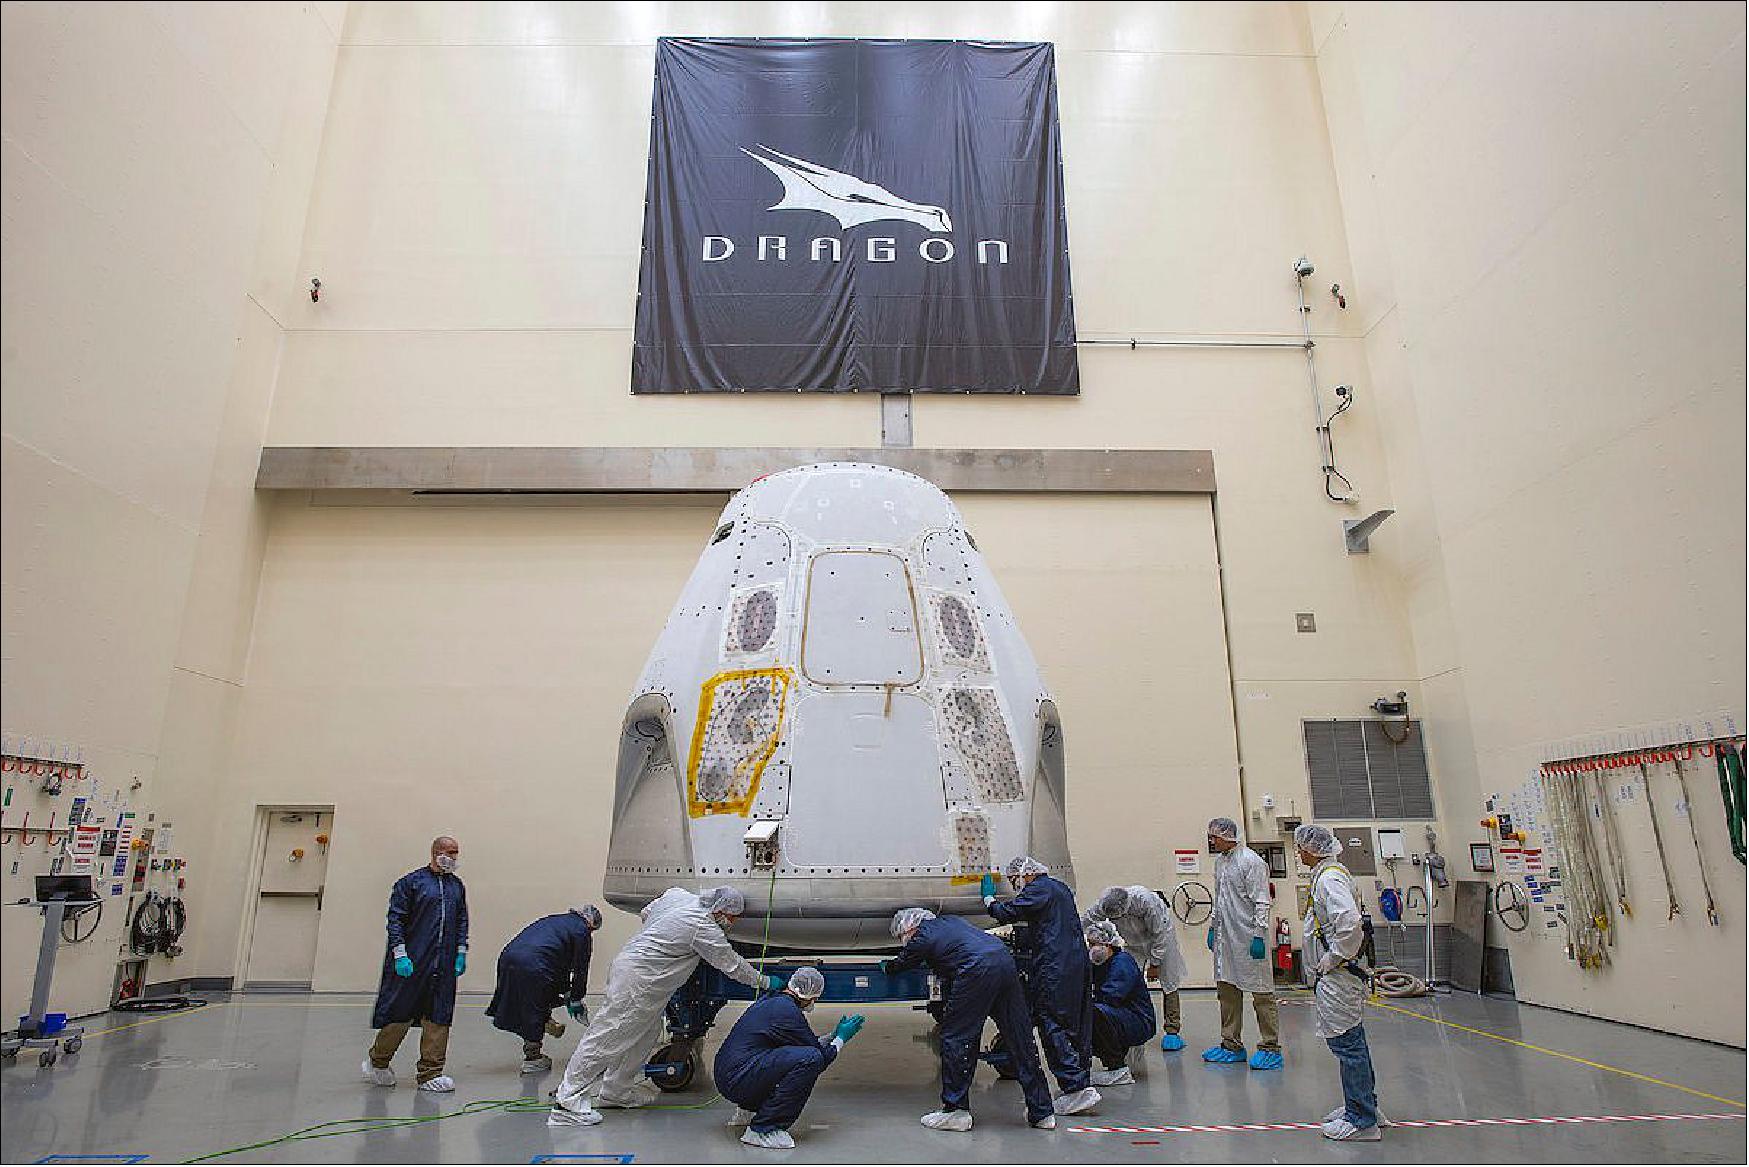 Figure 23: SpaceX’s Crew Dragon spacecraft that will deliver astronauts Doug Hurley and Bob Behnken to the International Space Station, has arrived at Cape Canaveral for launch preparations (image credit: SpaceX)